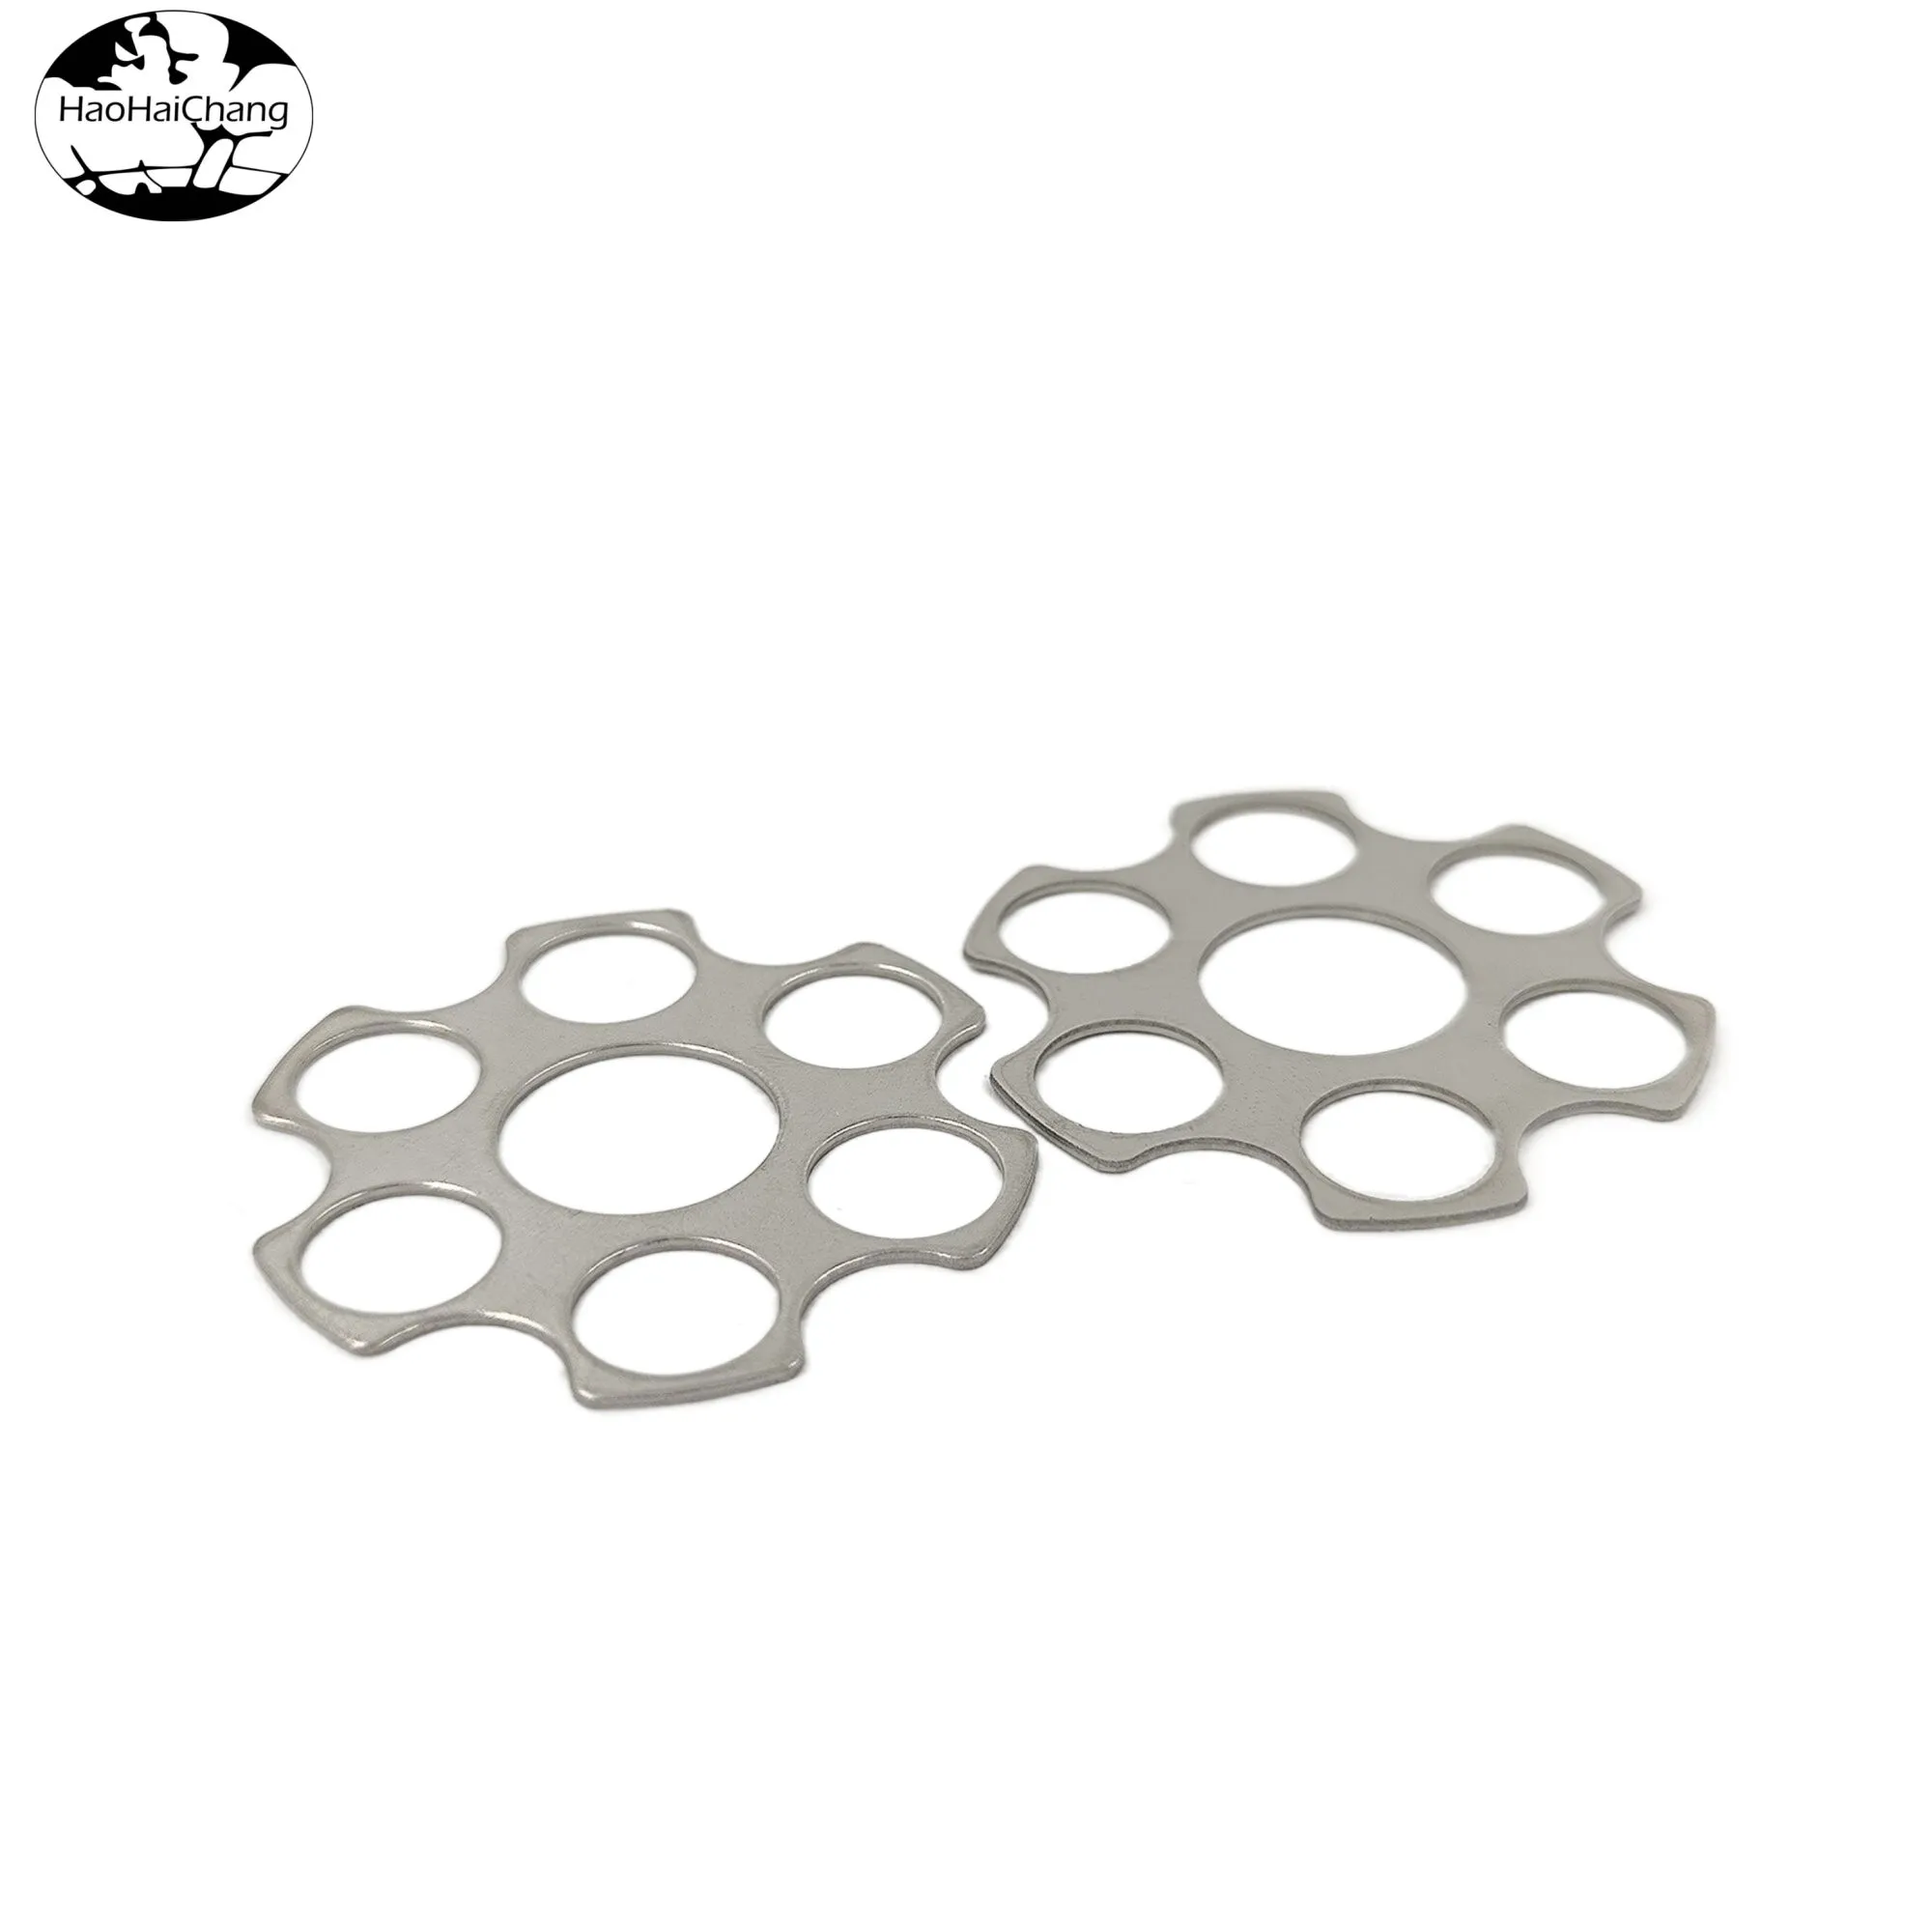 HHC-561 Porous Stainless Steel Flange Piece